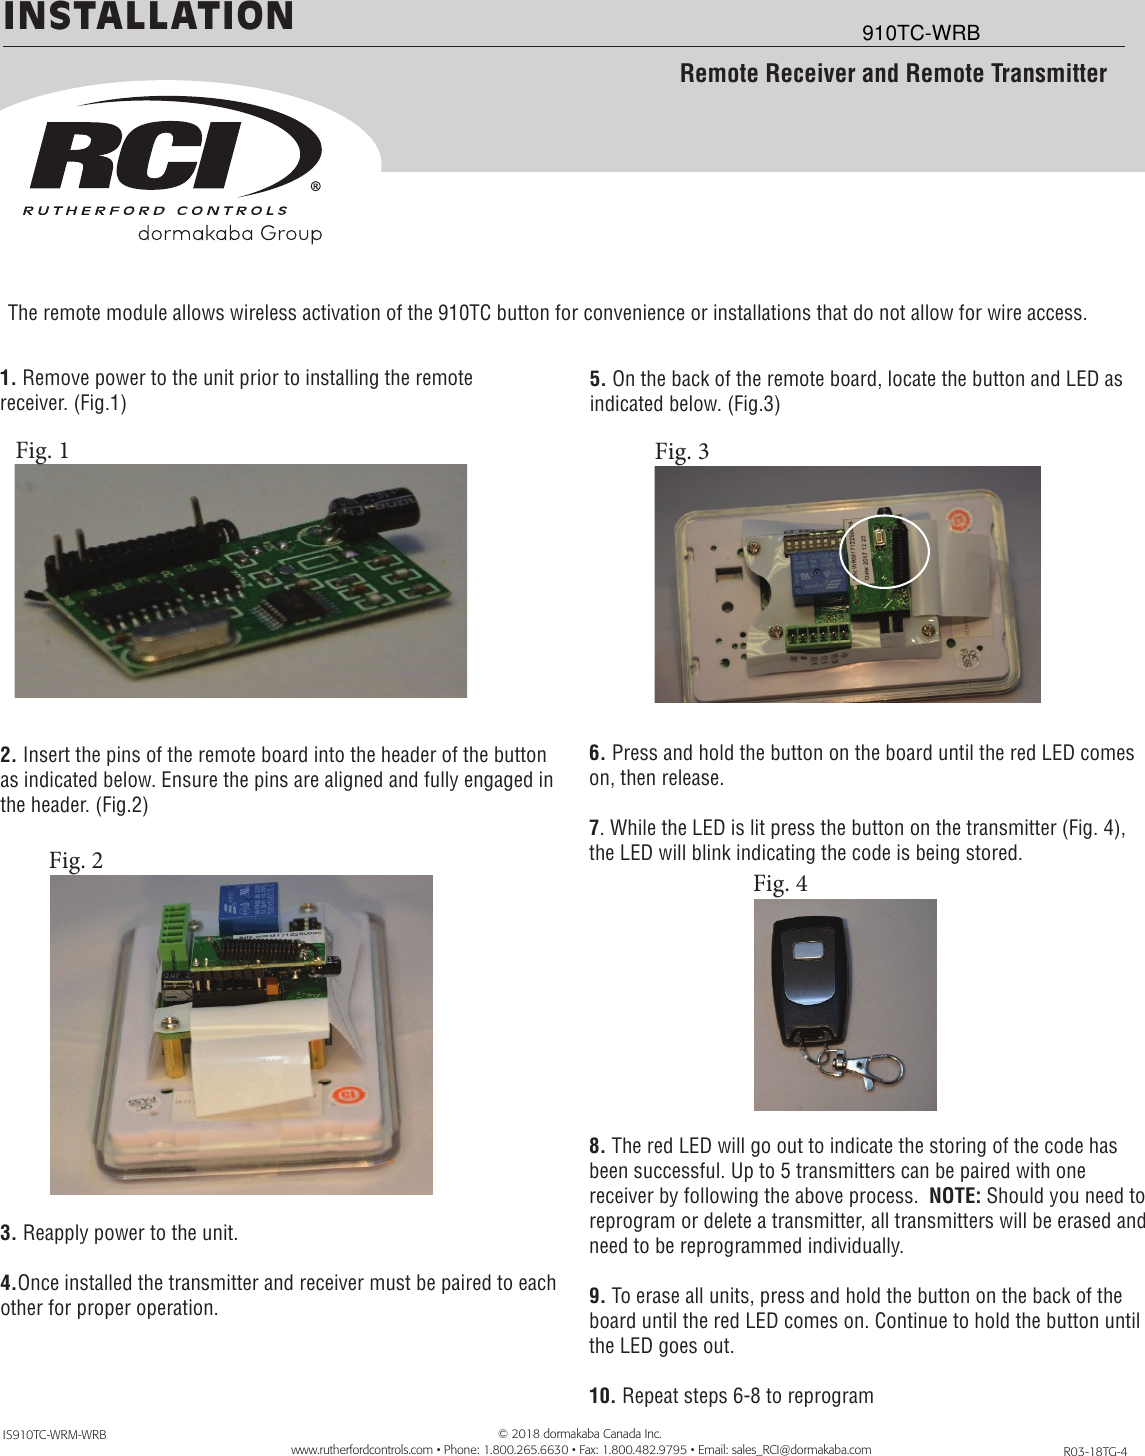 INSTALLATION1. Remove power to the unit prior to installing the remote                       receiver. (Fig.1)   2. Insert the pins of the remote board into the header of the button as indicated below. Ensure the pins are aligned and fully engaged in the header. (Fig.2)3. Reapply power to the unit.4.Once installed the transmitter and receiver must be paired to each other for proper operation.R03-18TG-4IS910TC-WRM-WRBRemote Receiver and Remote TransmitterThe remote module allows wireless activation of the 910TC button for convenience or installations that do not allow for wire access.5. On the back of the remote board, locate the button and LED as indicated below. (Fig.3)   6. Press and hold the button on the board until the red LED comes on, then release.7. While the LED is lit press the button on the transmitter (Fig. 4), the LED will blink indicating the code is being stored.8. The red LED will go out to indicate the storing of the code has been successful. Up to 5 transmitters can be paired with one receiver by following the above process.  NOTE: Should you need to reprogram or delete a transmitter, all transmitters will be erased and need to be reprogrammed individually.9. To erase all units, press and hold the button on the back of the board until the red LED comes on. Continue to hold the button until the LED goes out.10. Repeat steps 6-8 to reprogram        © 2018 dormakaba Canada Inc.        www.rutherfordcontrols.com • Phone: 1.800.265.6630 • Fax: 1.800.482.9795 • Email: sales_RCI@dormakaba.comFig. 1Fig. 2 Fig. 4Fig. 3910TC-WRB